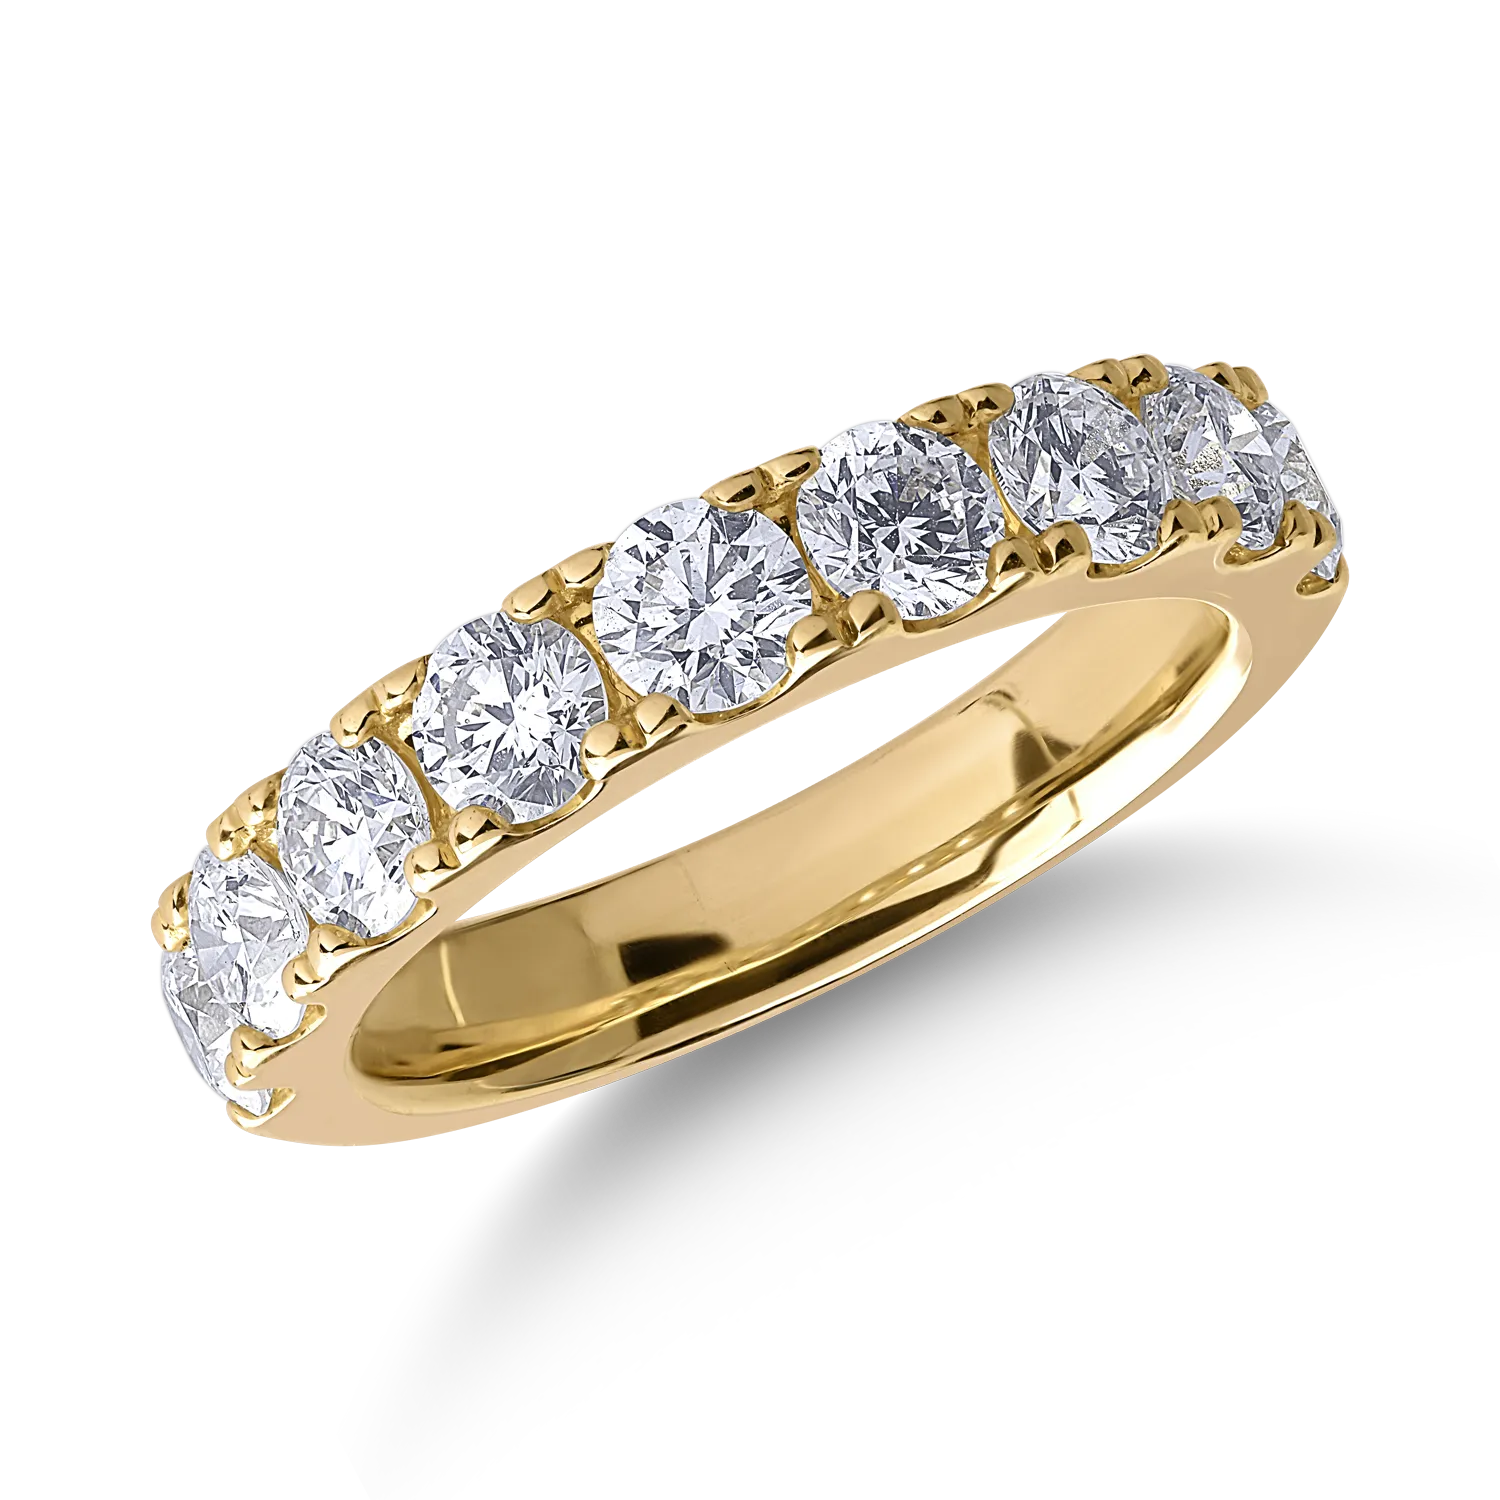 14K yellow gold ring with 1.5ct diamonds